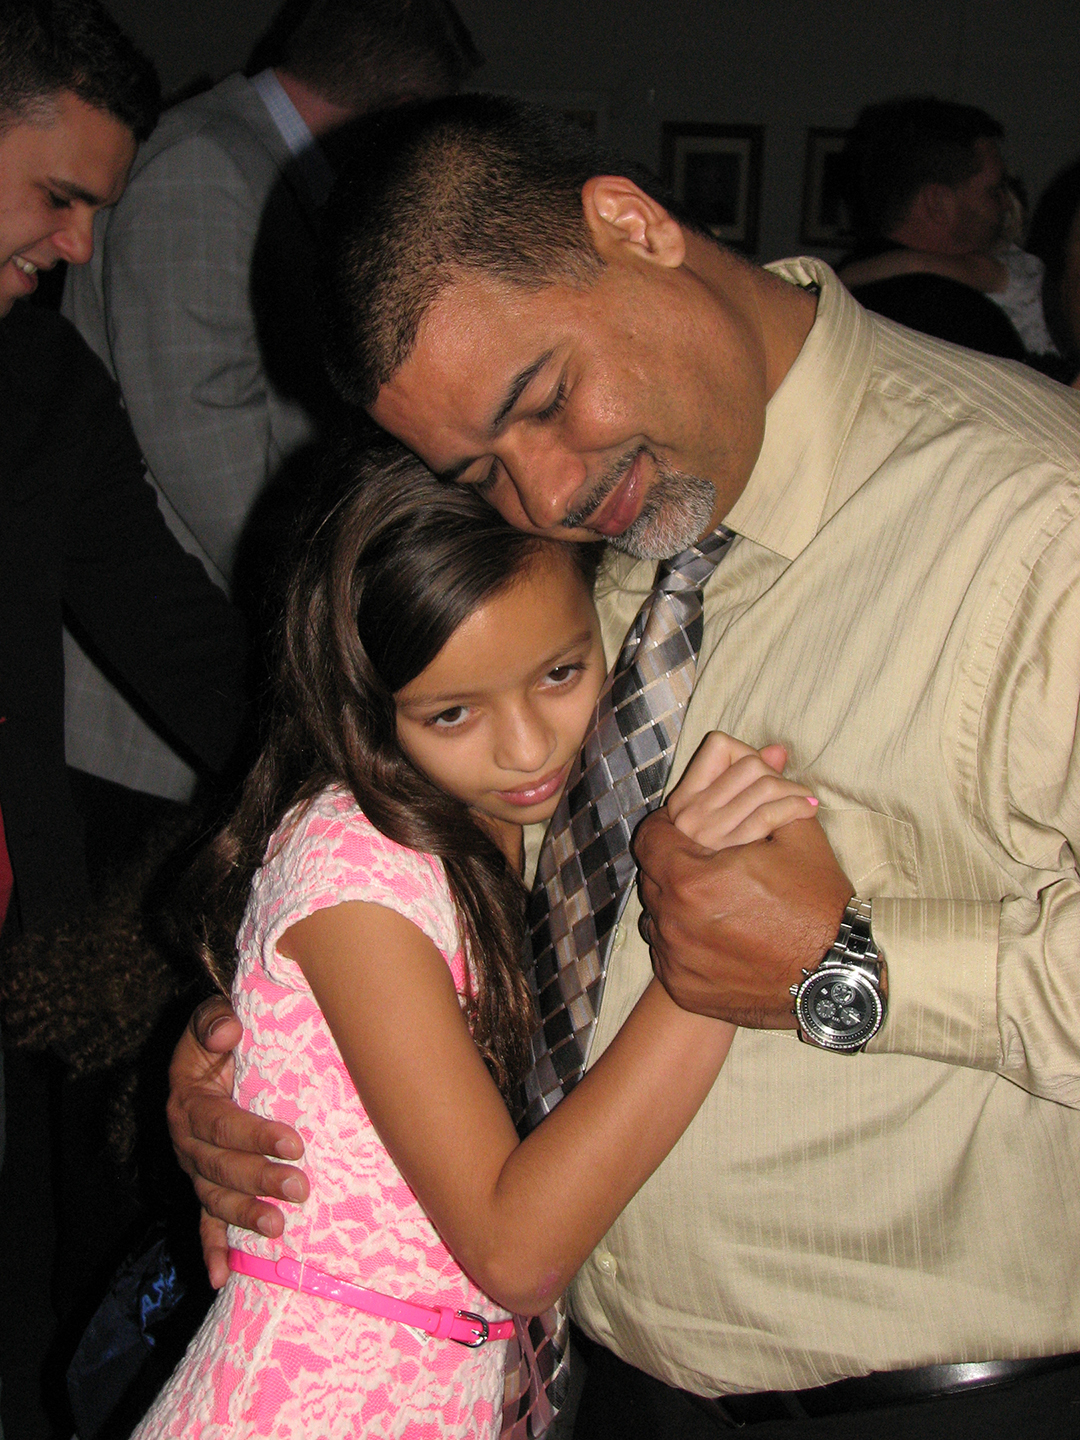 Daddy-Daughter Dance 6 p.m. at the Palm Coast Community Center, 305 Palm Coast Parkway NE. Tickets: $20 for dads; $25 for daughters. The “Underwater Fantasy Ball” includes dinner, music, dancing and professional photos. Visit palmcoastgov.com/register.